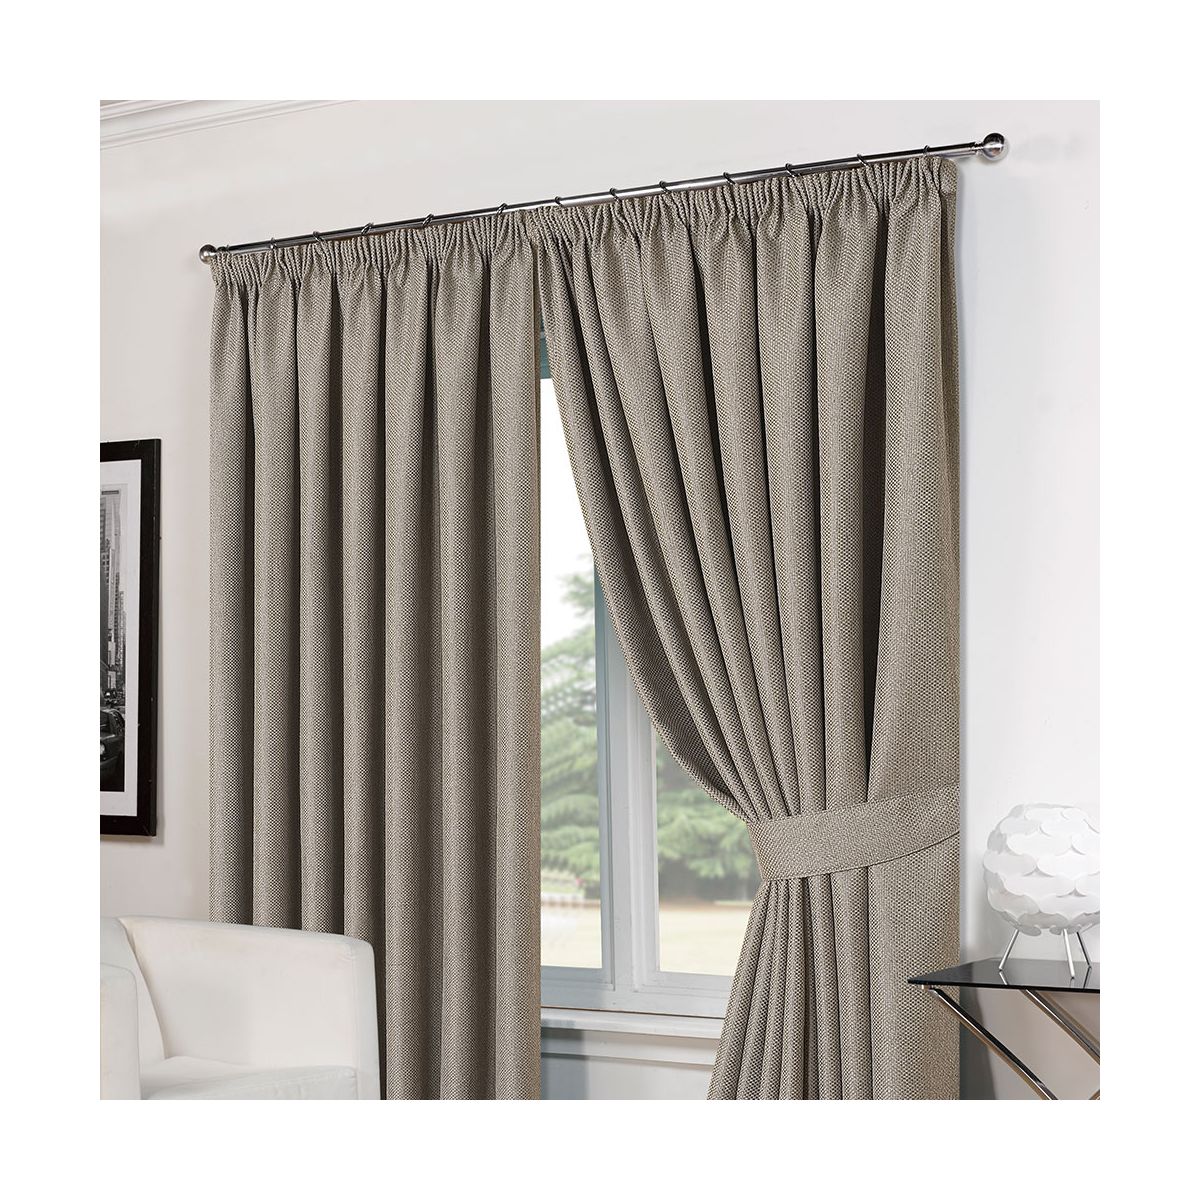 Luxury Basket Weave Lined Tape Top Curtains with Tiebacks - Silver/Grey 46x54